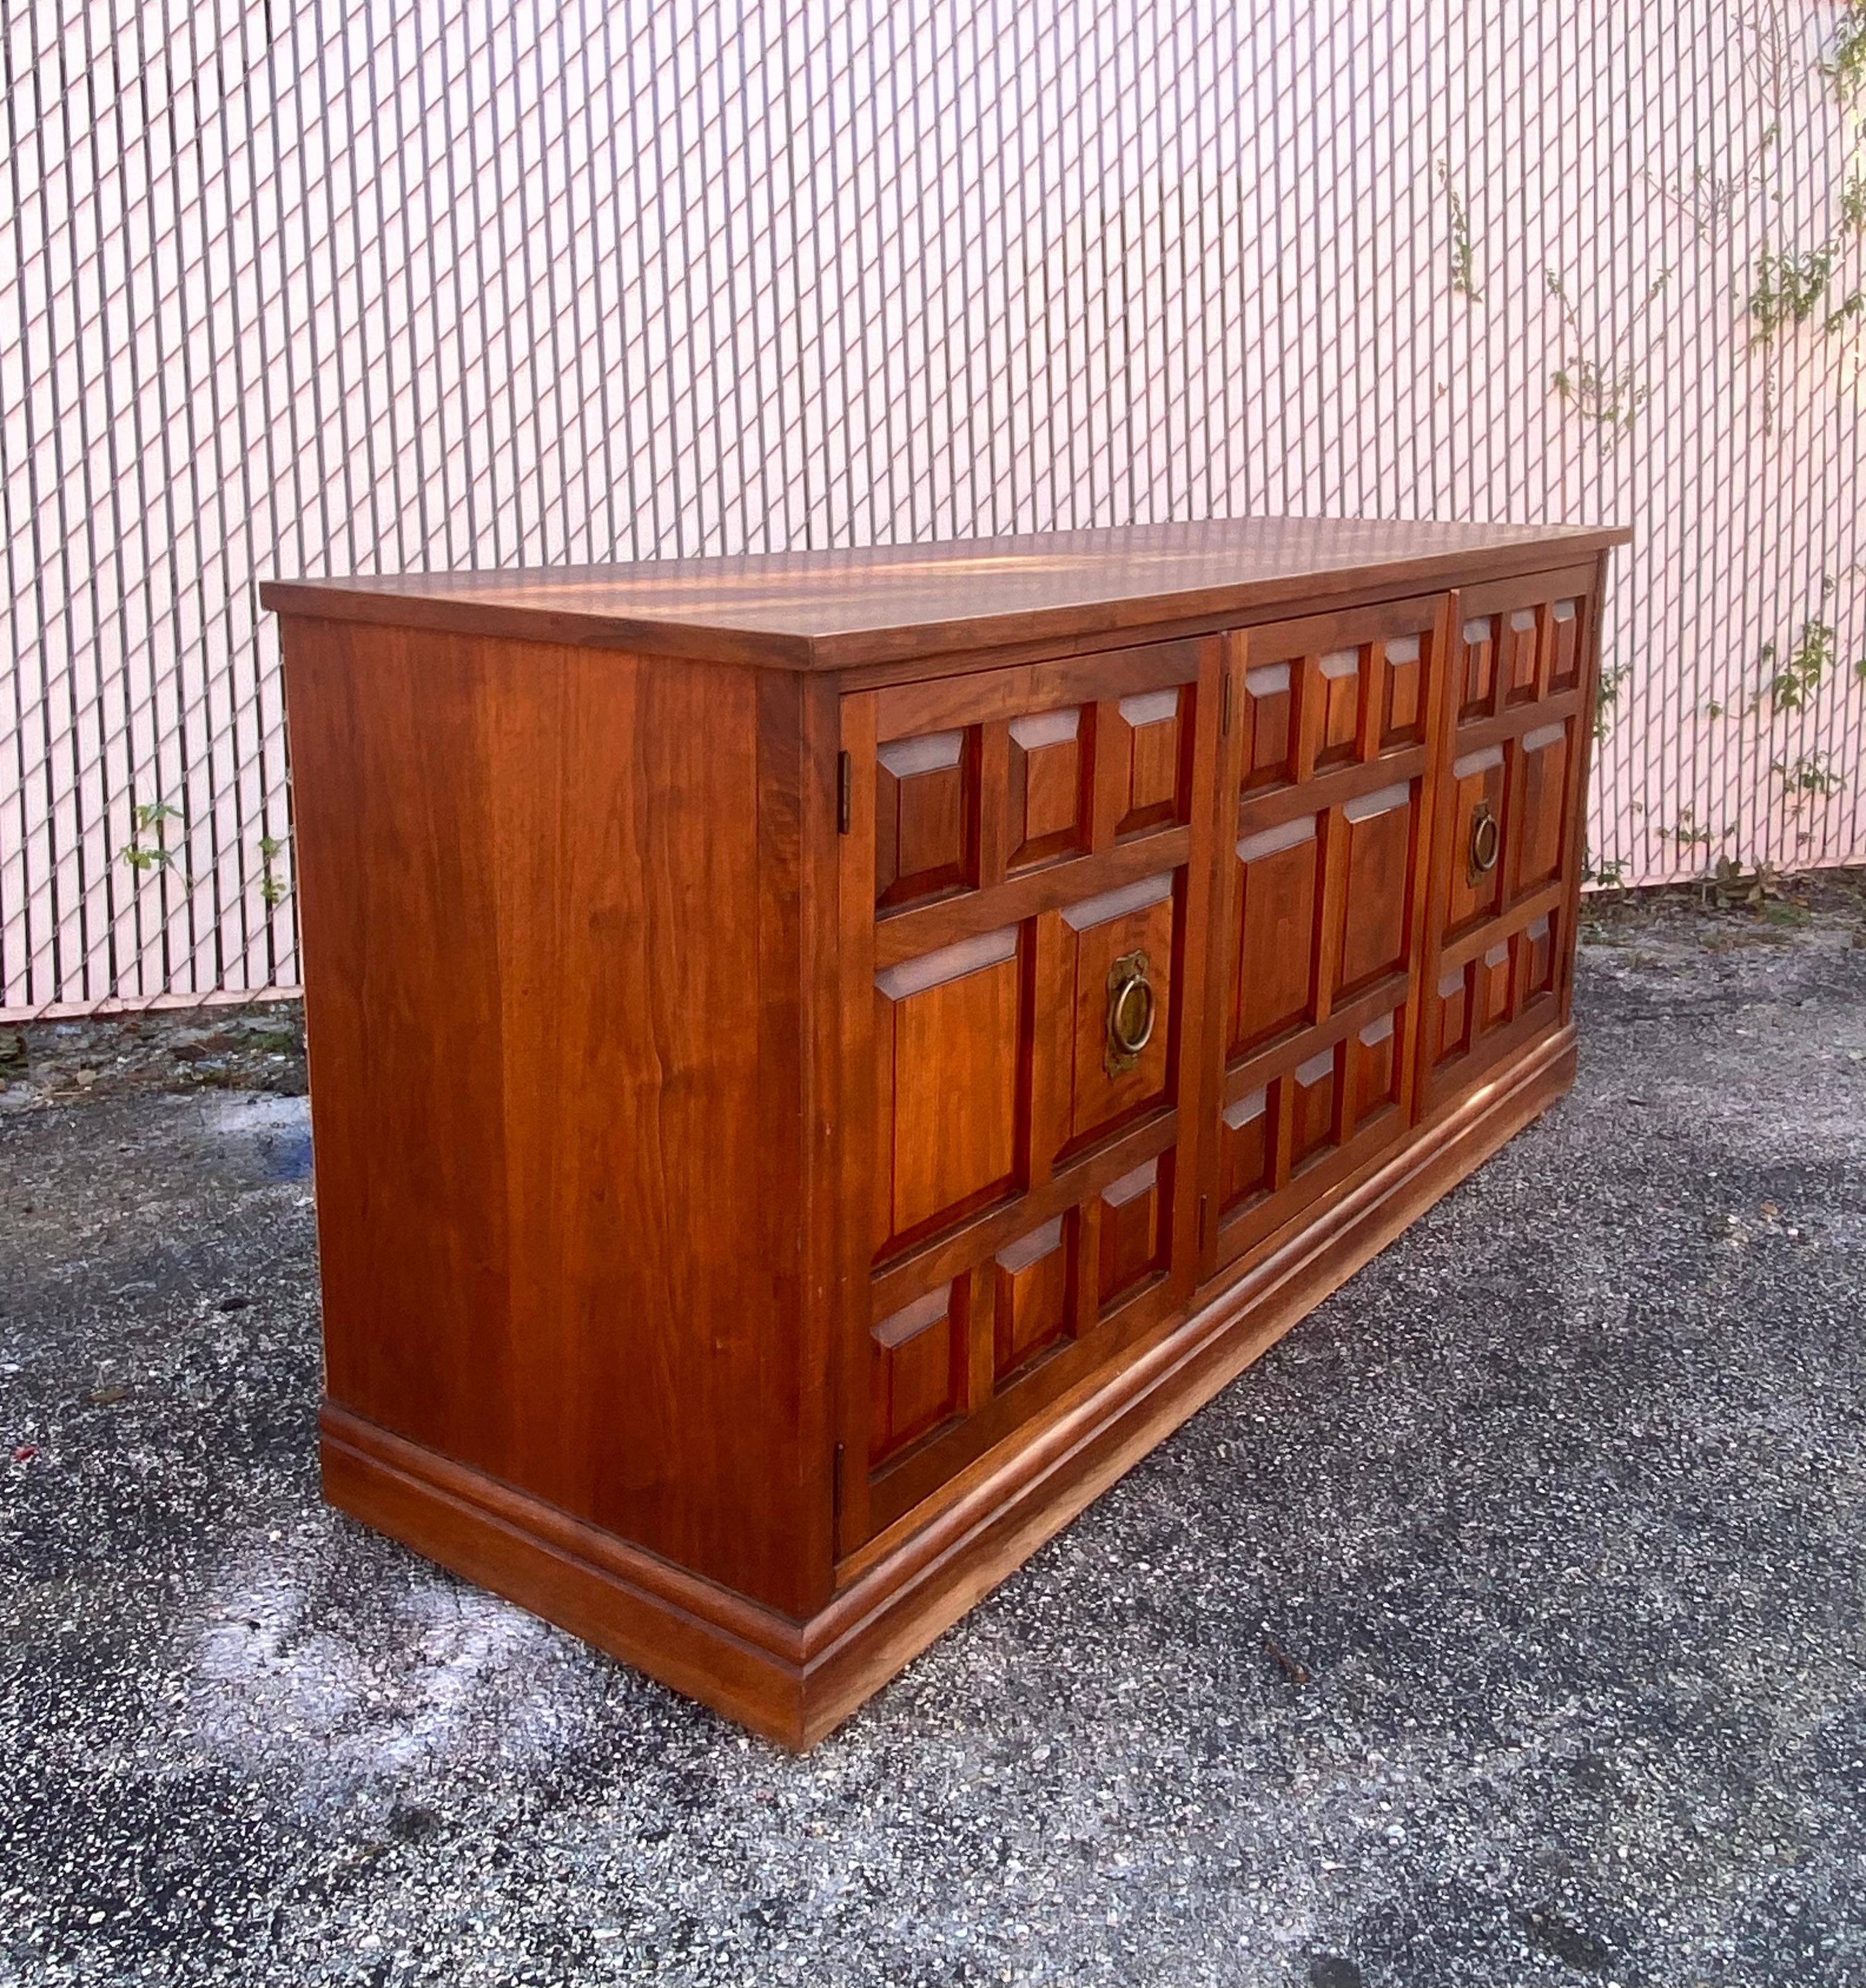 1960s Widdicomb Spanish Baroque Style Wood SideBoard Storage Cabinet For Sale 1